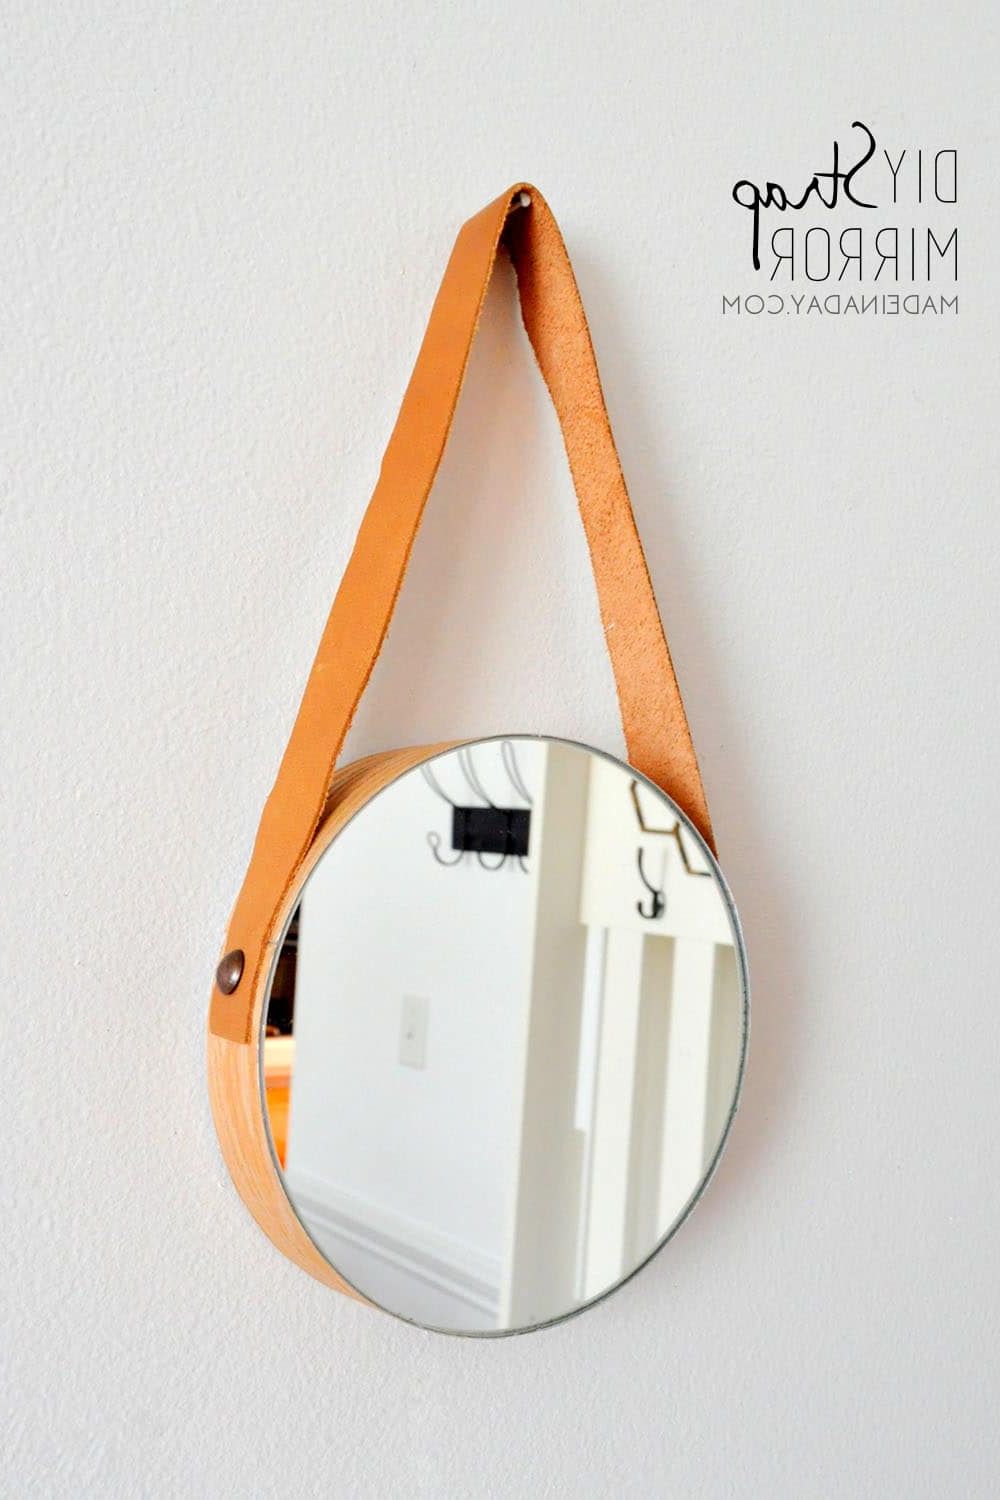 Black Leather Strap Wall Mirrors In Most Popular Diy Wood Leather Strap Mirror (View 11 of 15)